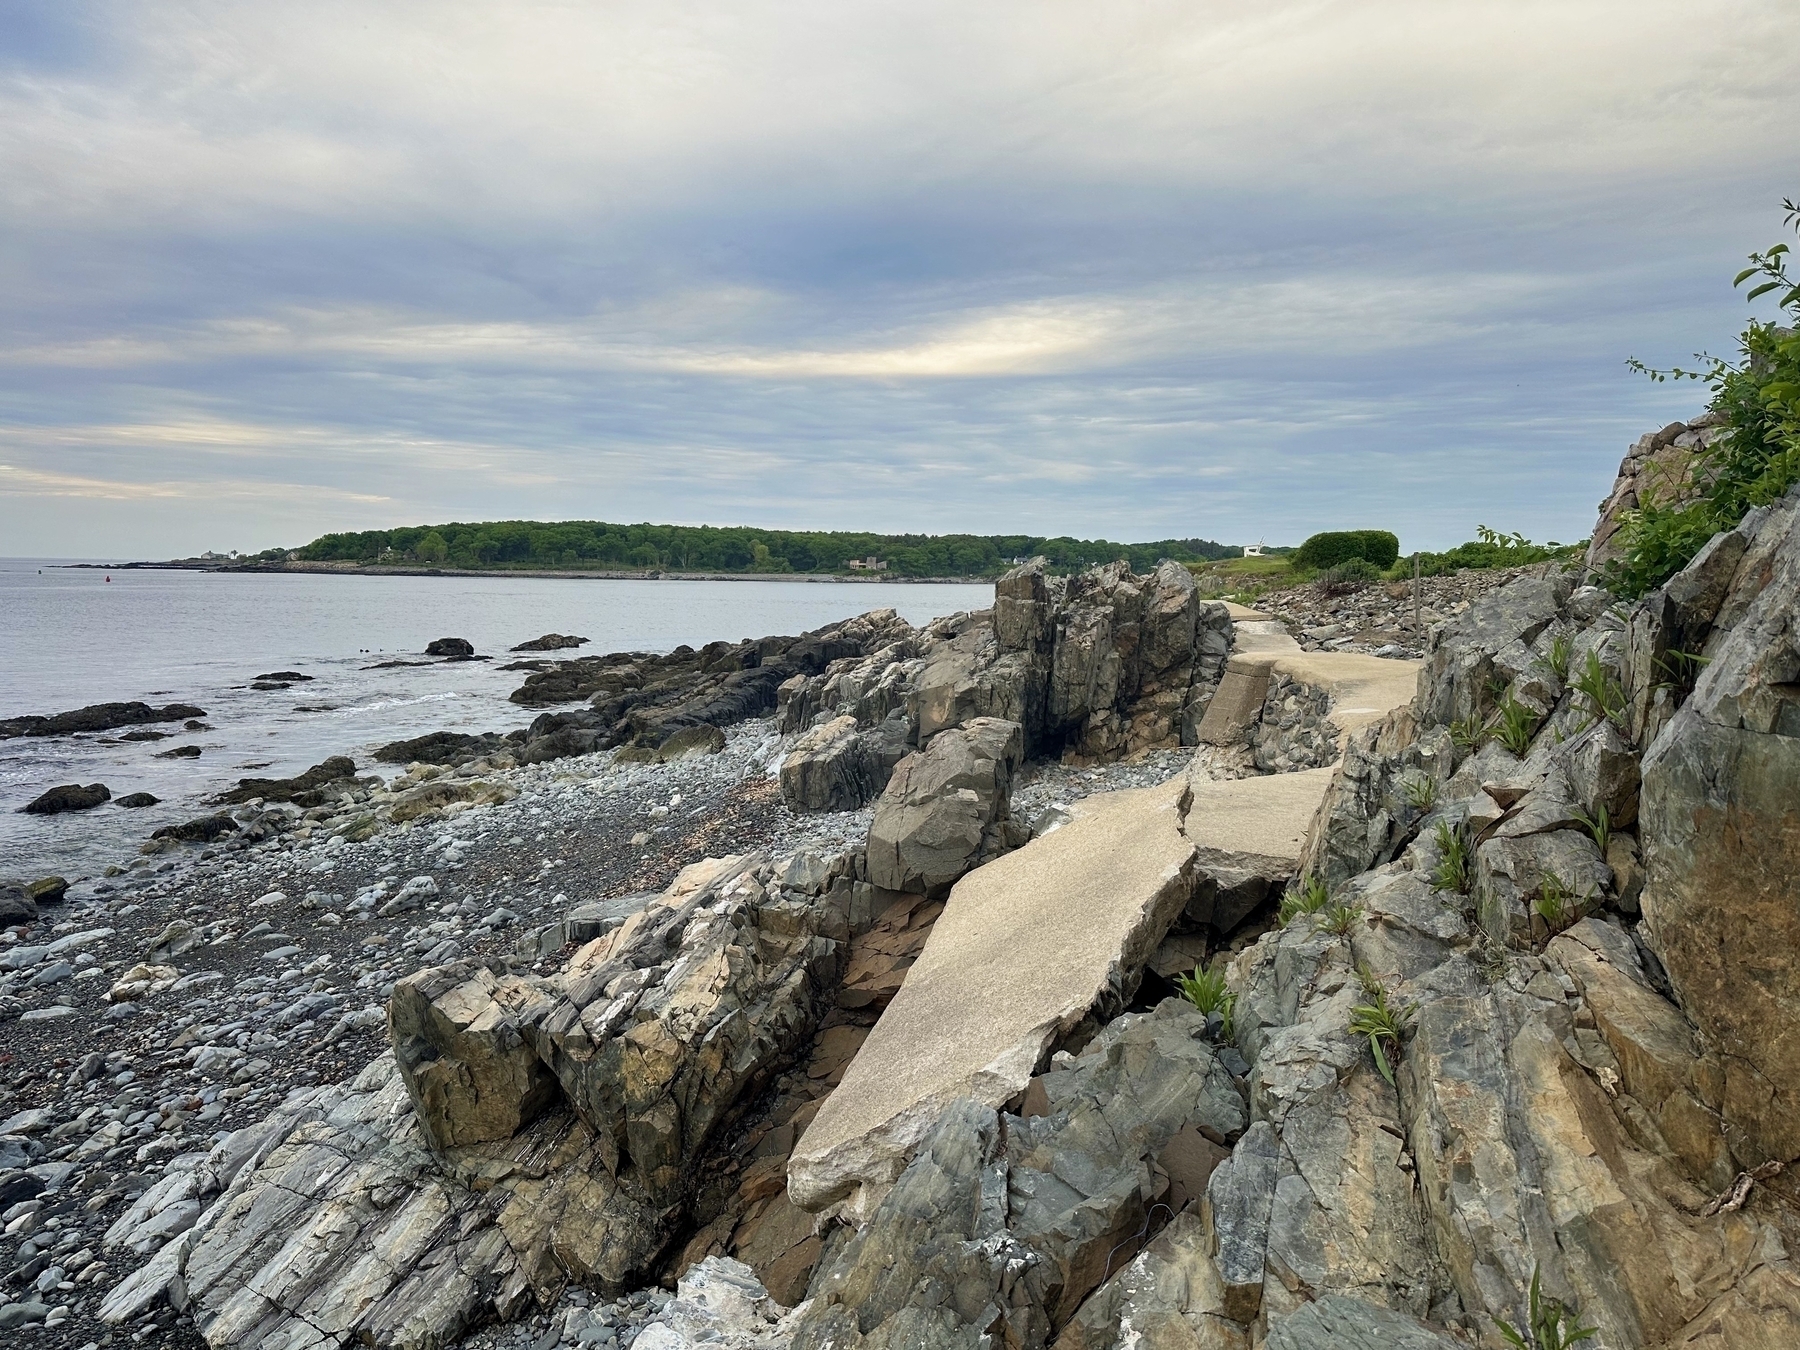 Rocky coastline adjacent to calm sea under a cloudy sky with a concrete pathway winding through large rocks and distant greenery displayed on the horizon.